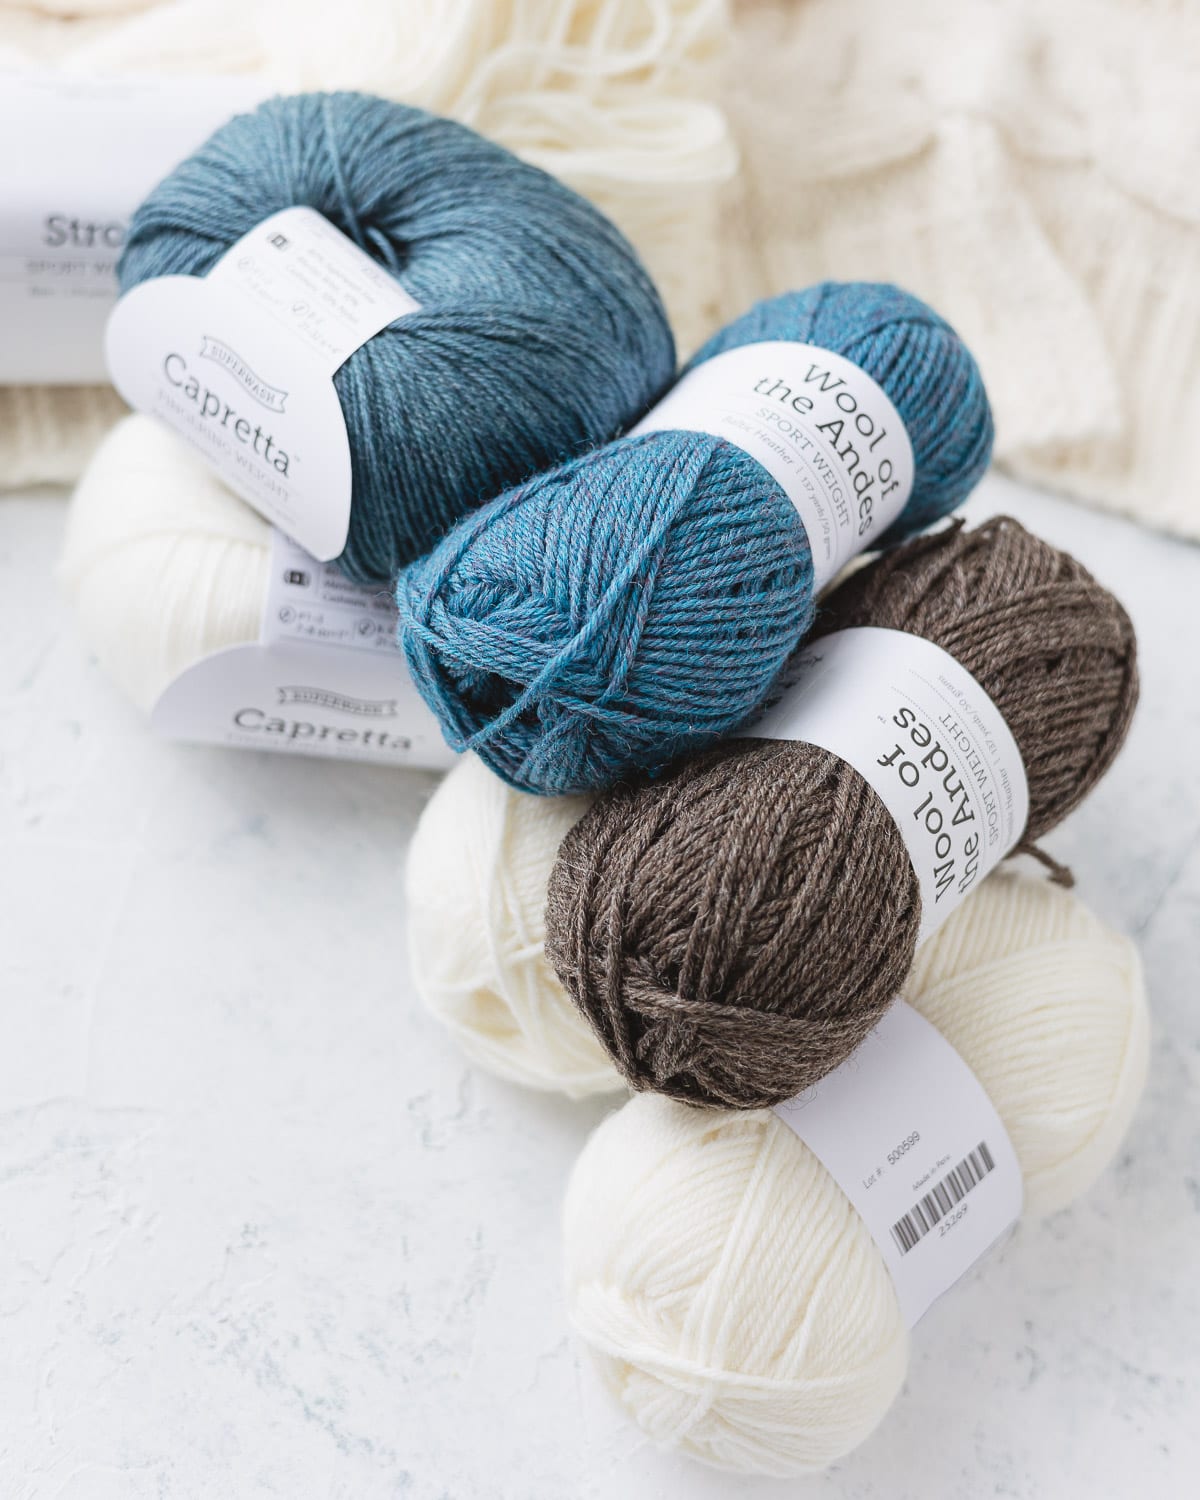 A selection of blue, cream, and brown yarn from Knit Picks.